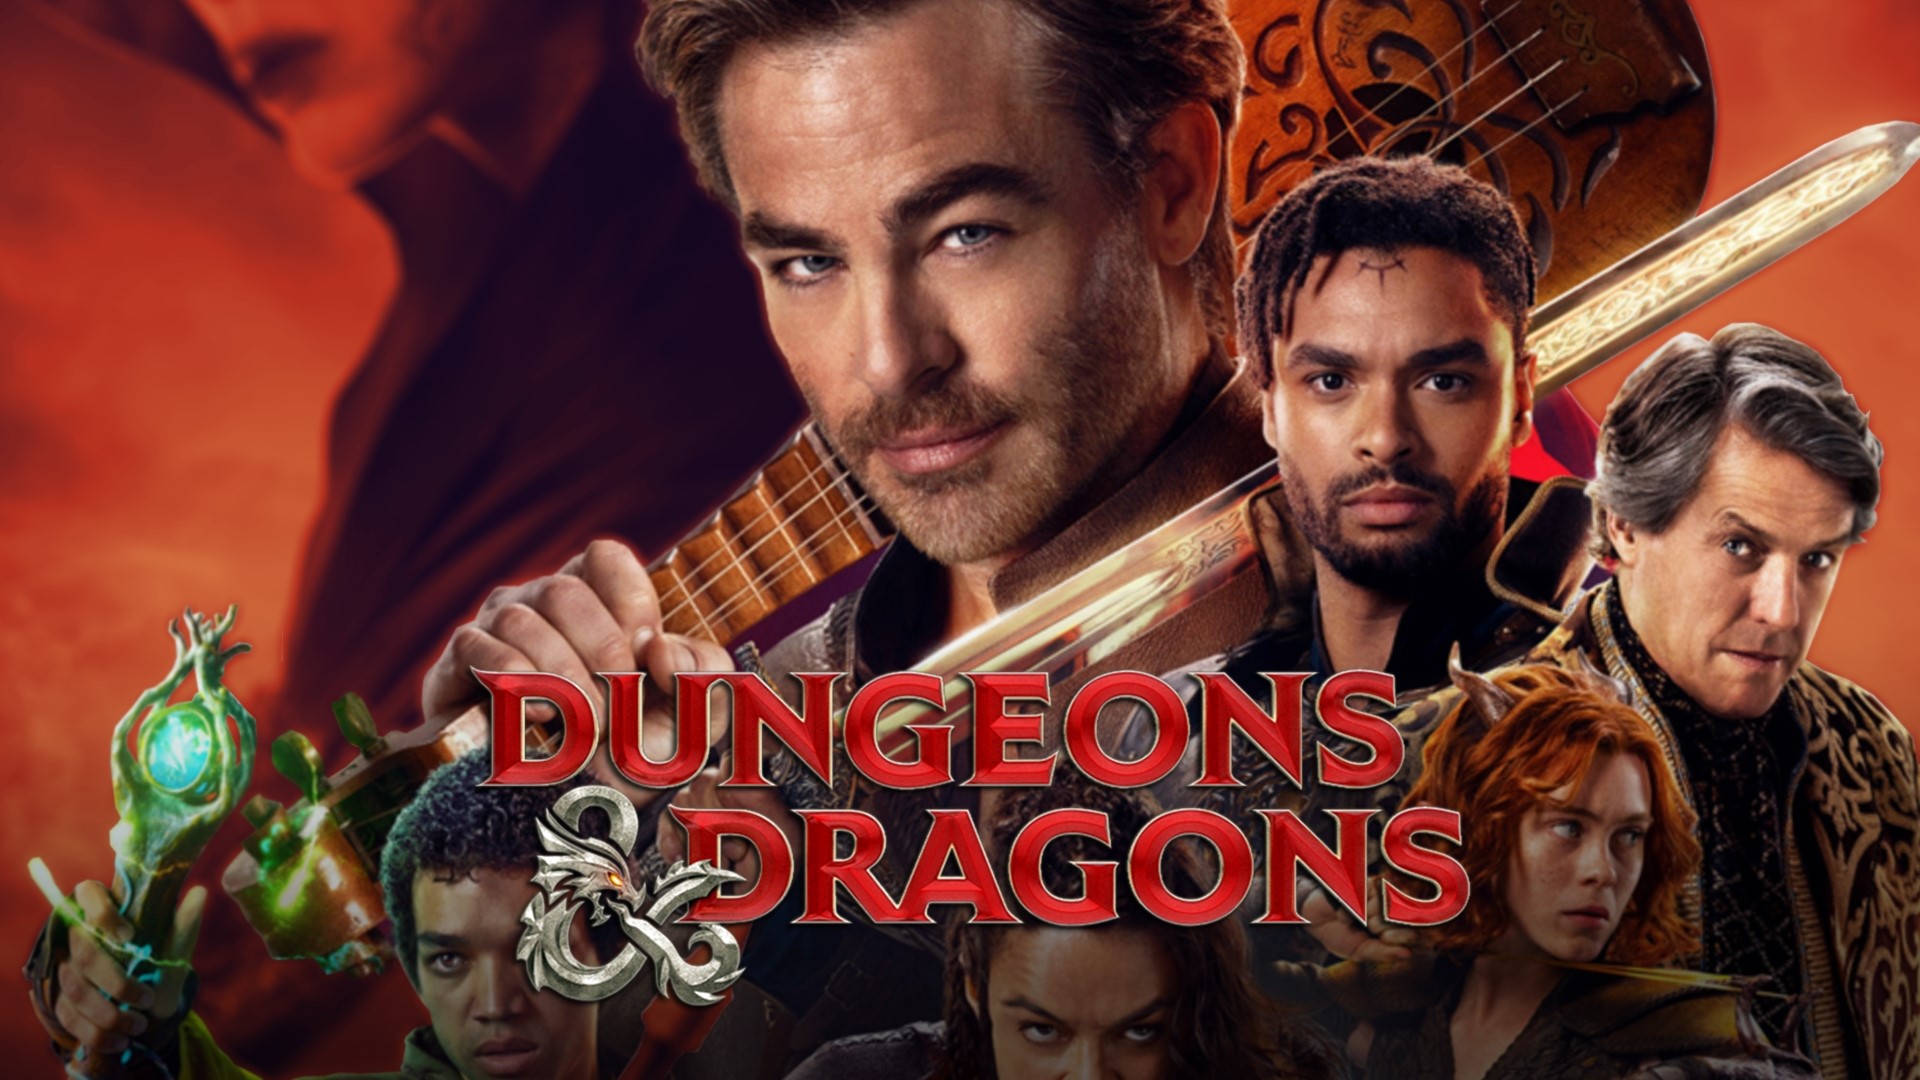 movie review for dungeons and dragons